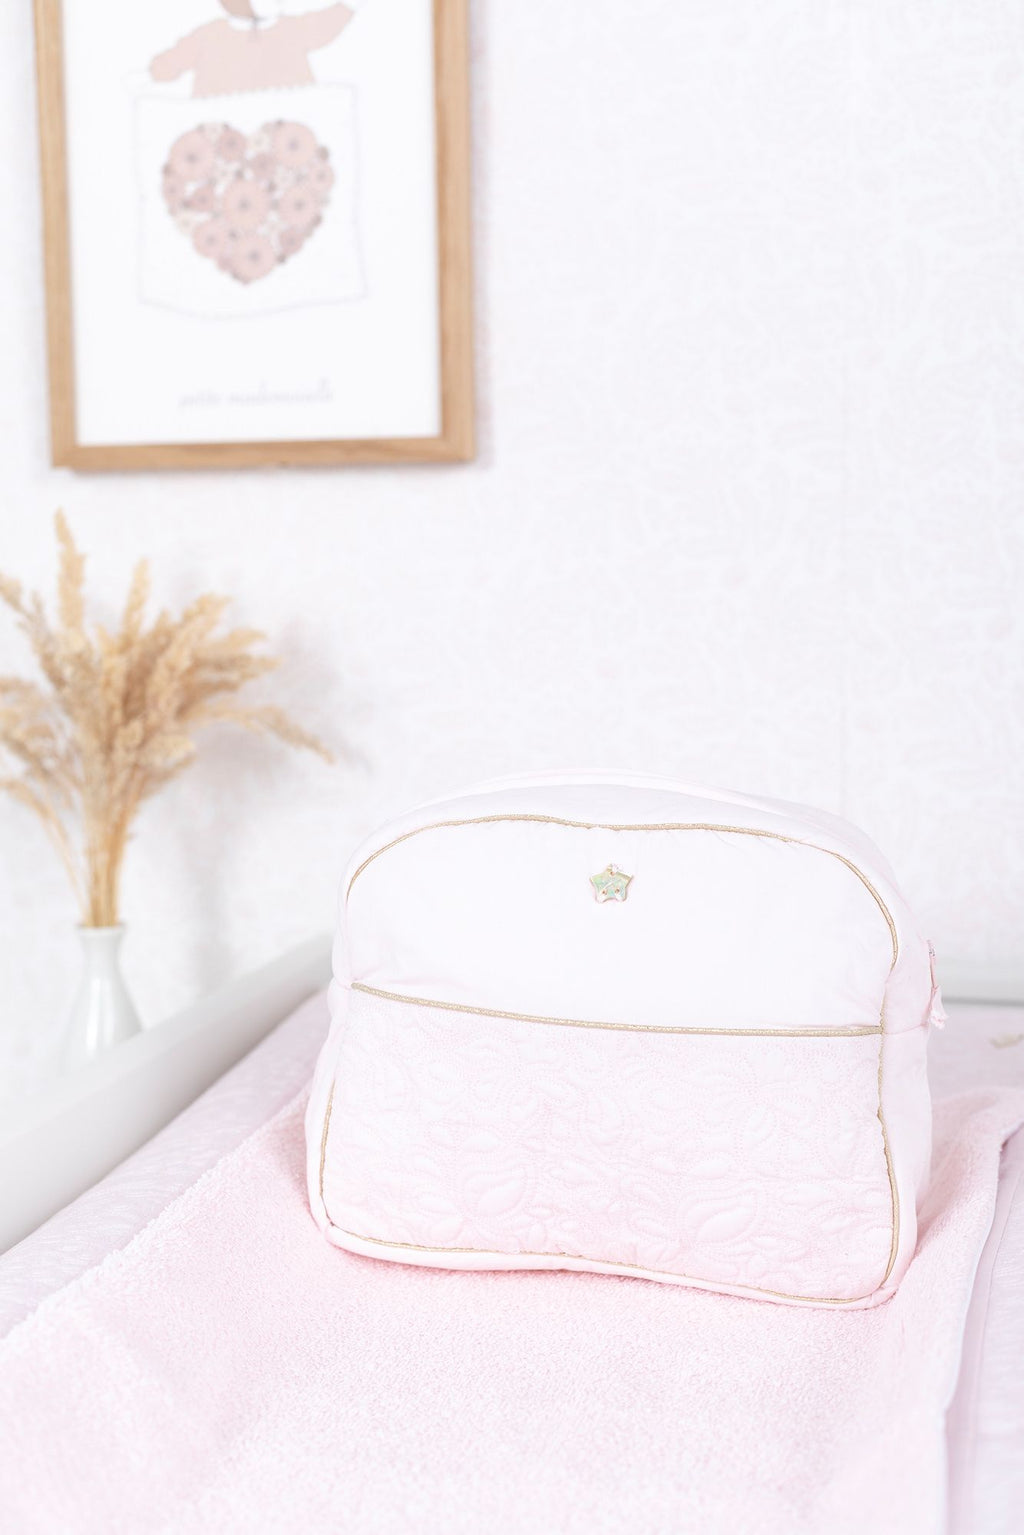 Toiletry bag - Delicacy Pale pink